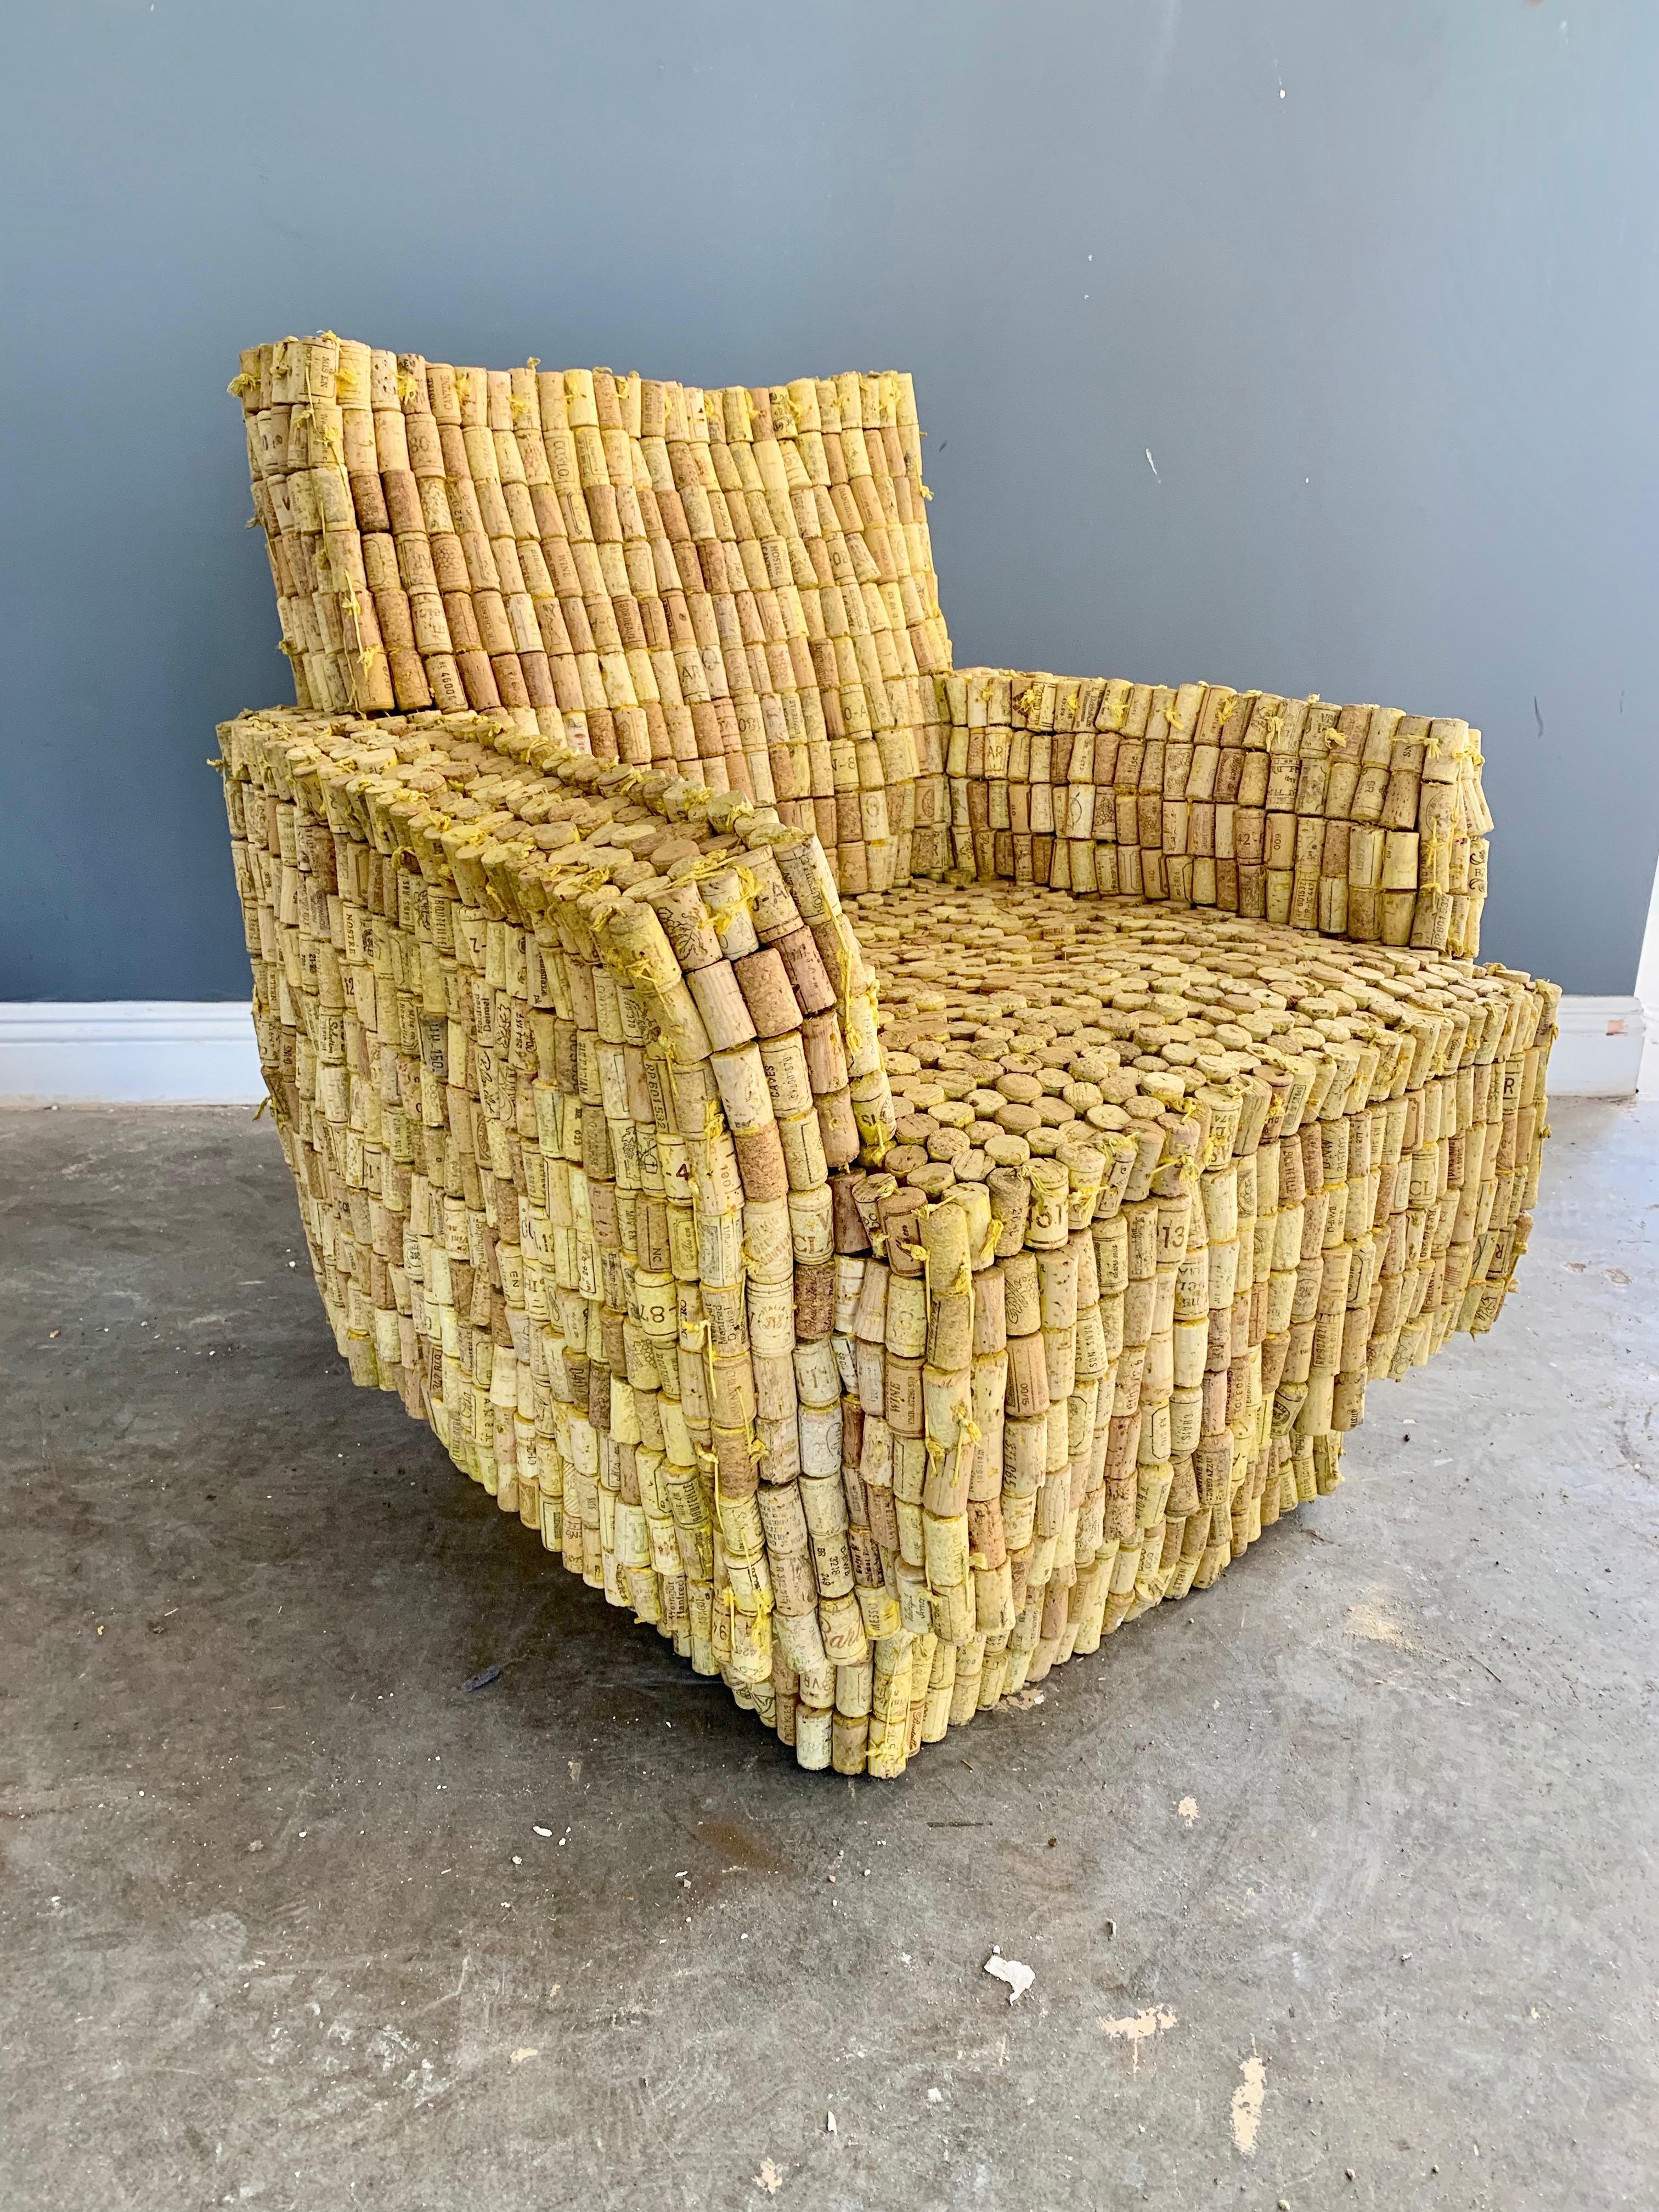 Fantastic armchair made entirely of cork. Wooden frame underneath. Chair is handmade by stringing hundreds of pieces of cork together. Very sturdy and extremely comfortable. Super cool piece of art and functional seat. Perfect for a wine cellar or